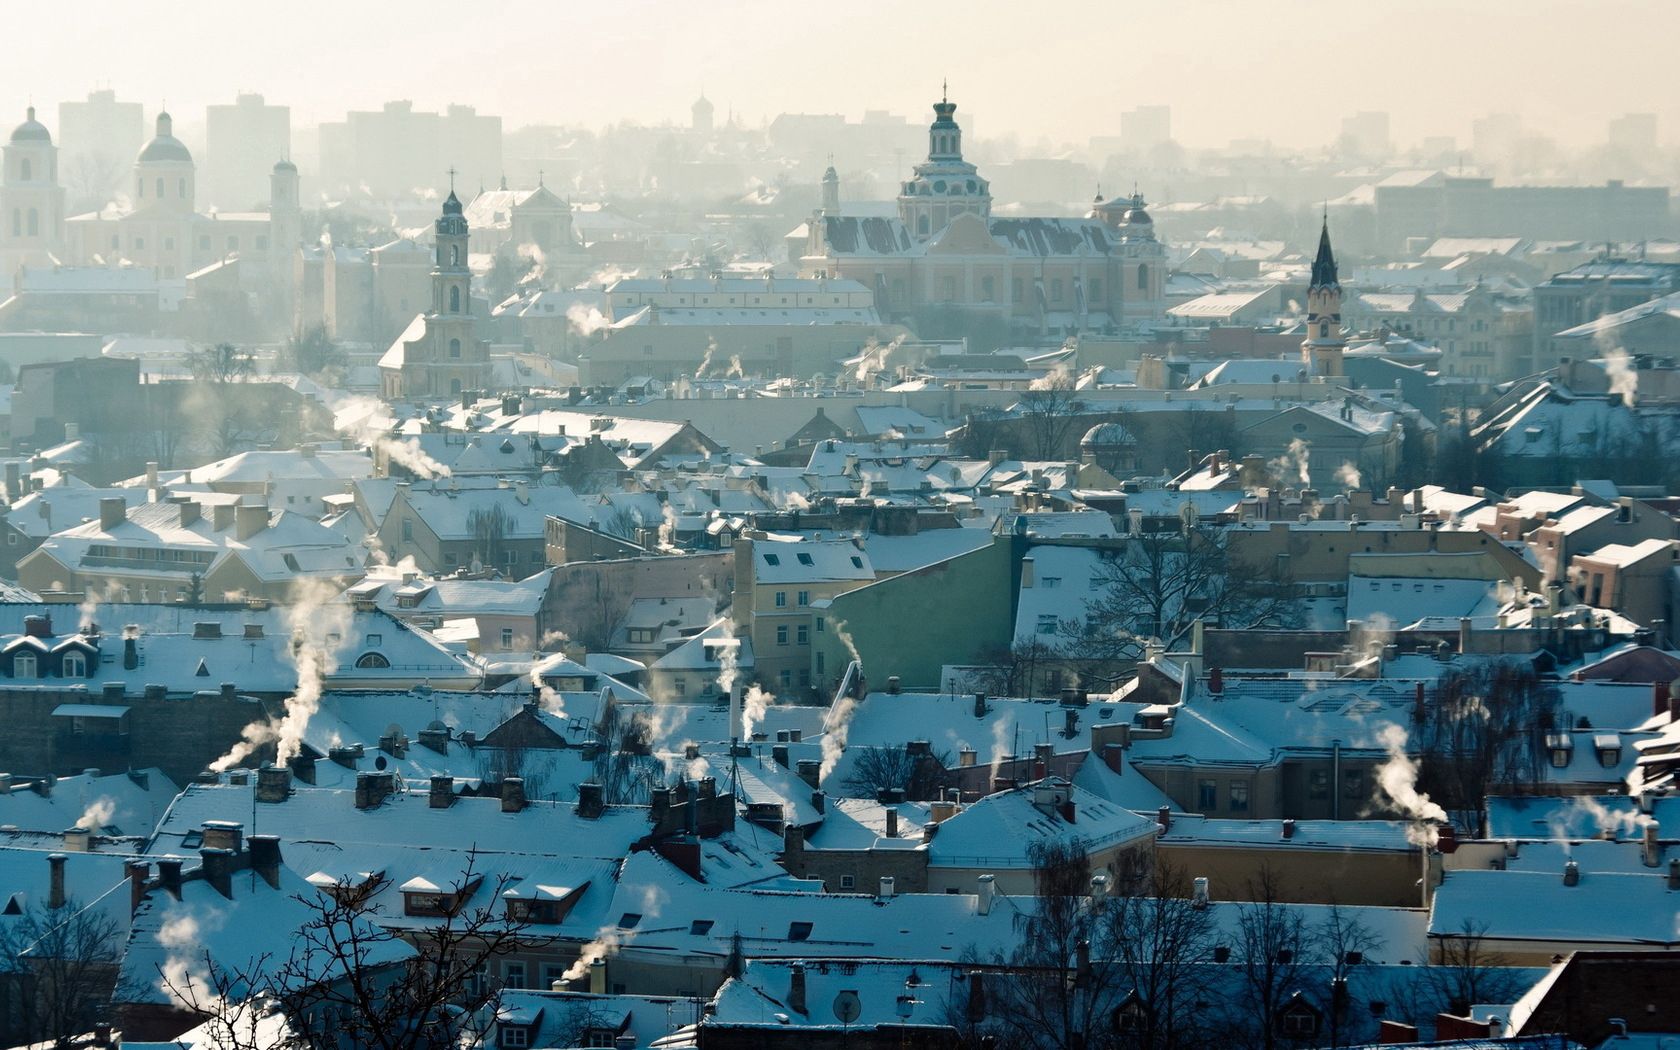 cities, smoke, lithuania, panorama, urban landscape, cityscape, roof, roofs, vilnius cell phone wallpapers